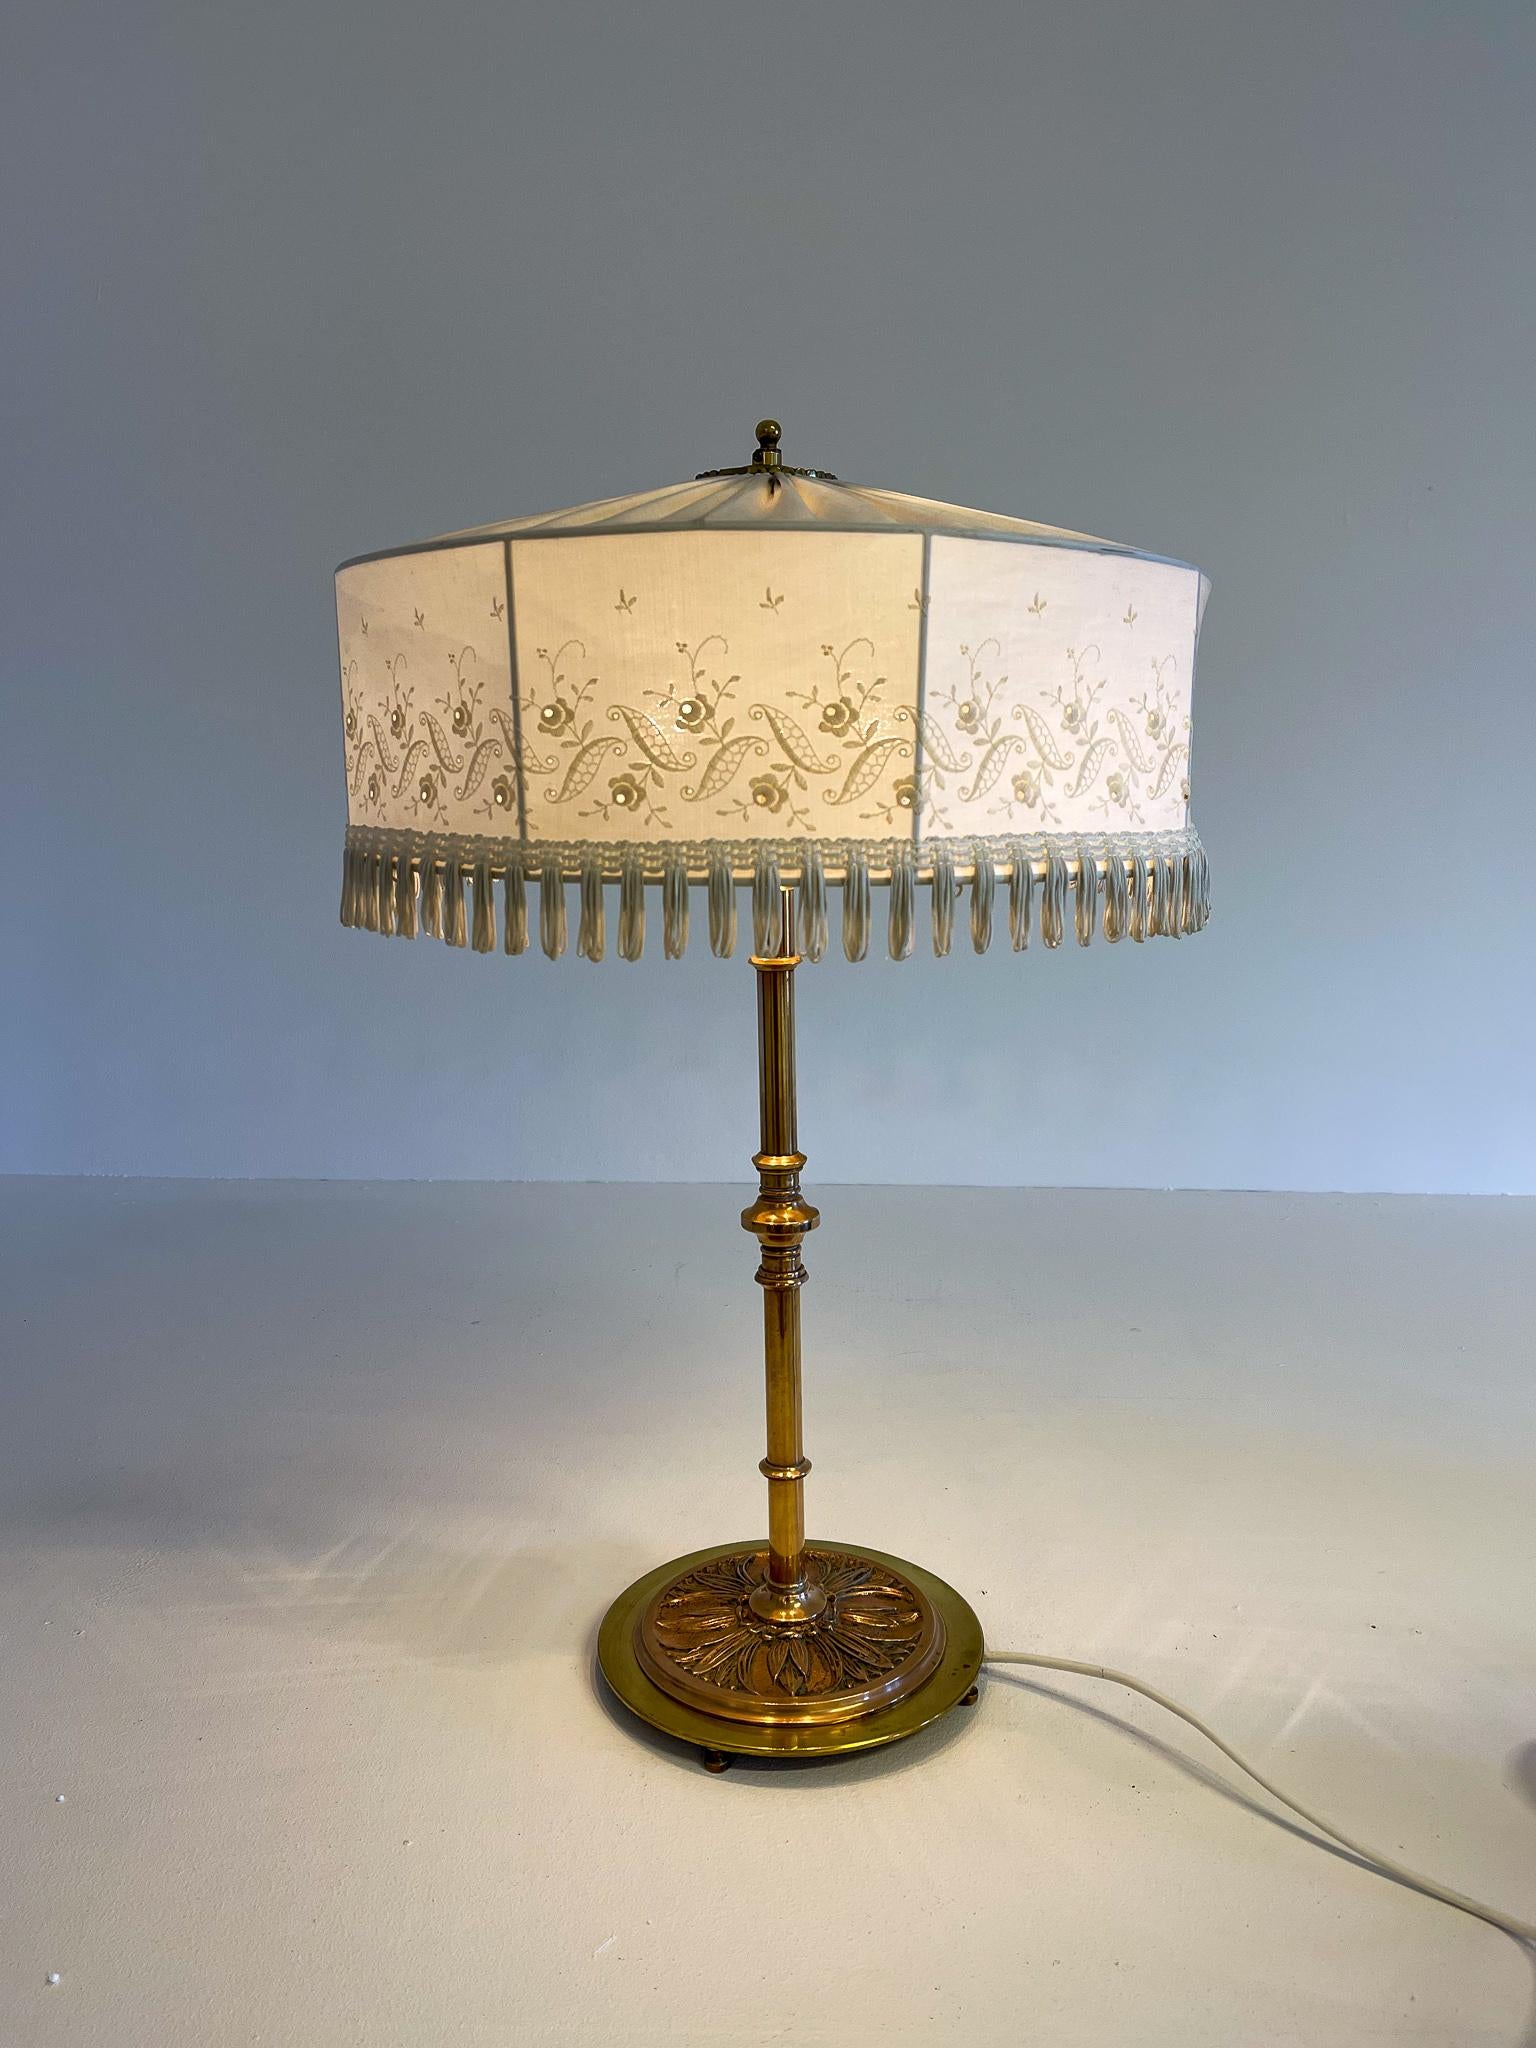 Art Deco table lamp brass and copper metal, Sweden, 1930s

Nice looking table lamp in Art Deco style. It made from brass and copper with an original fringe shade.

Good vintage condition. New wiring

Measures: H 60 cm, D shade 40 cm, D foot 20